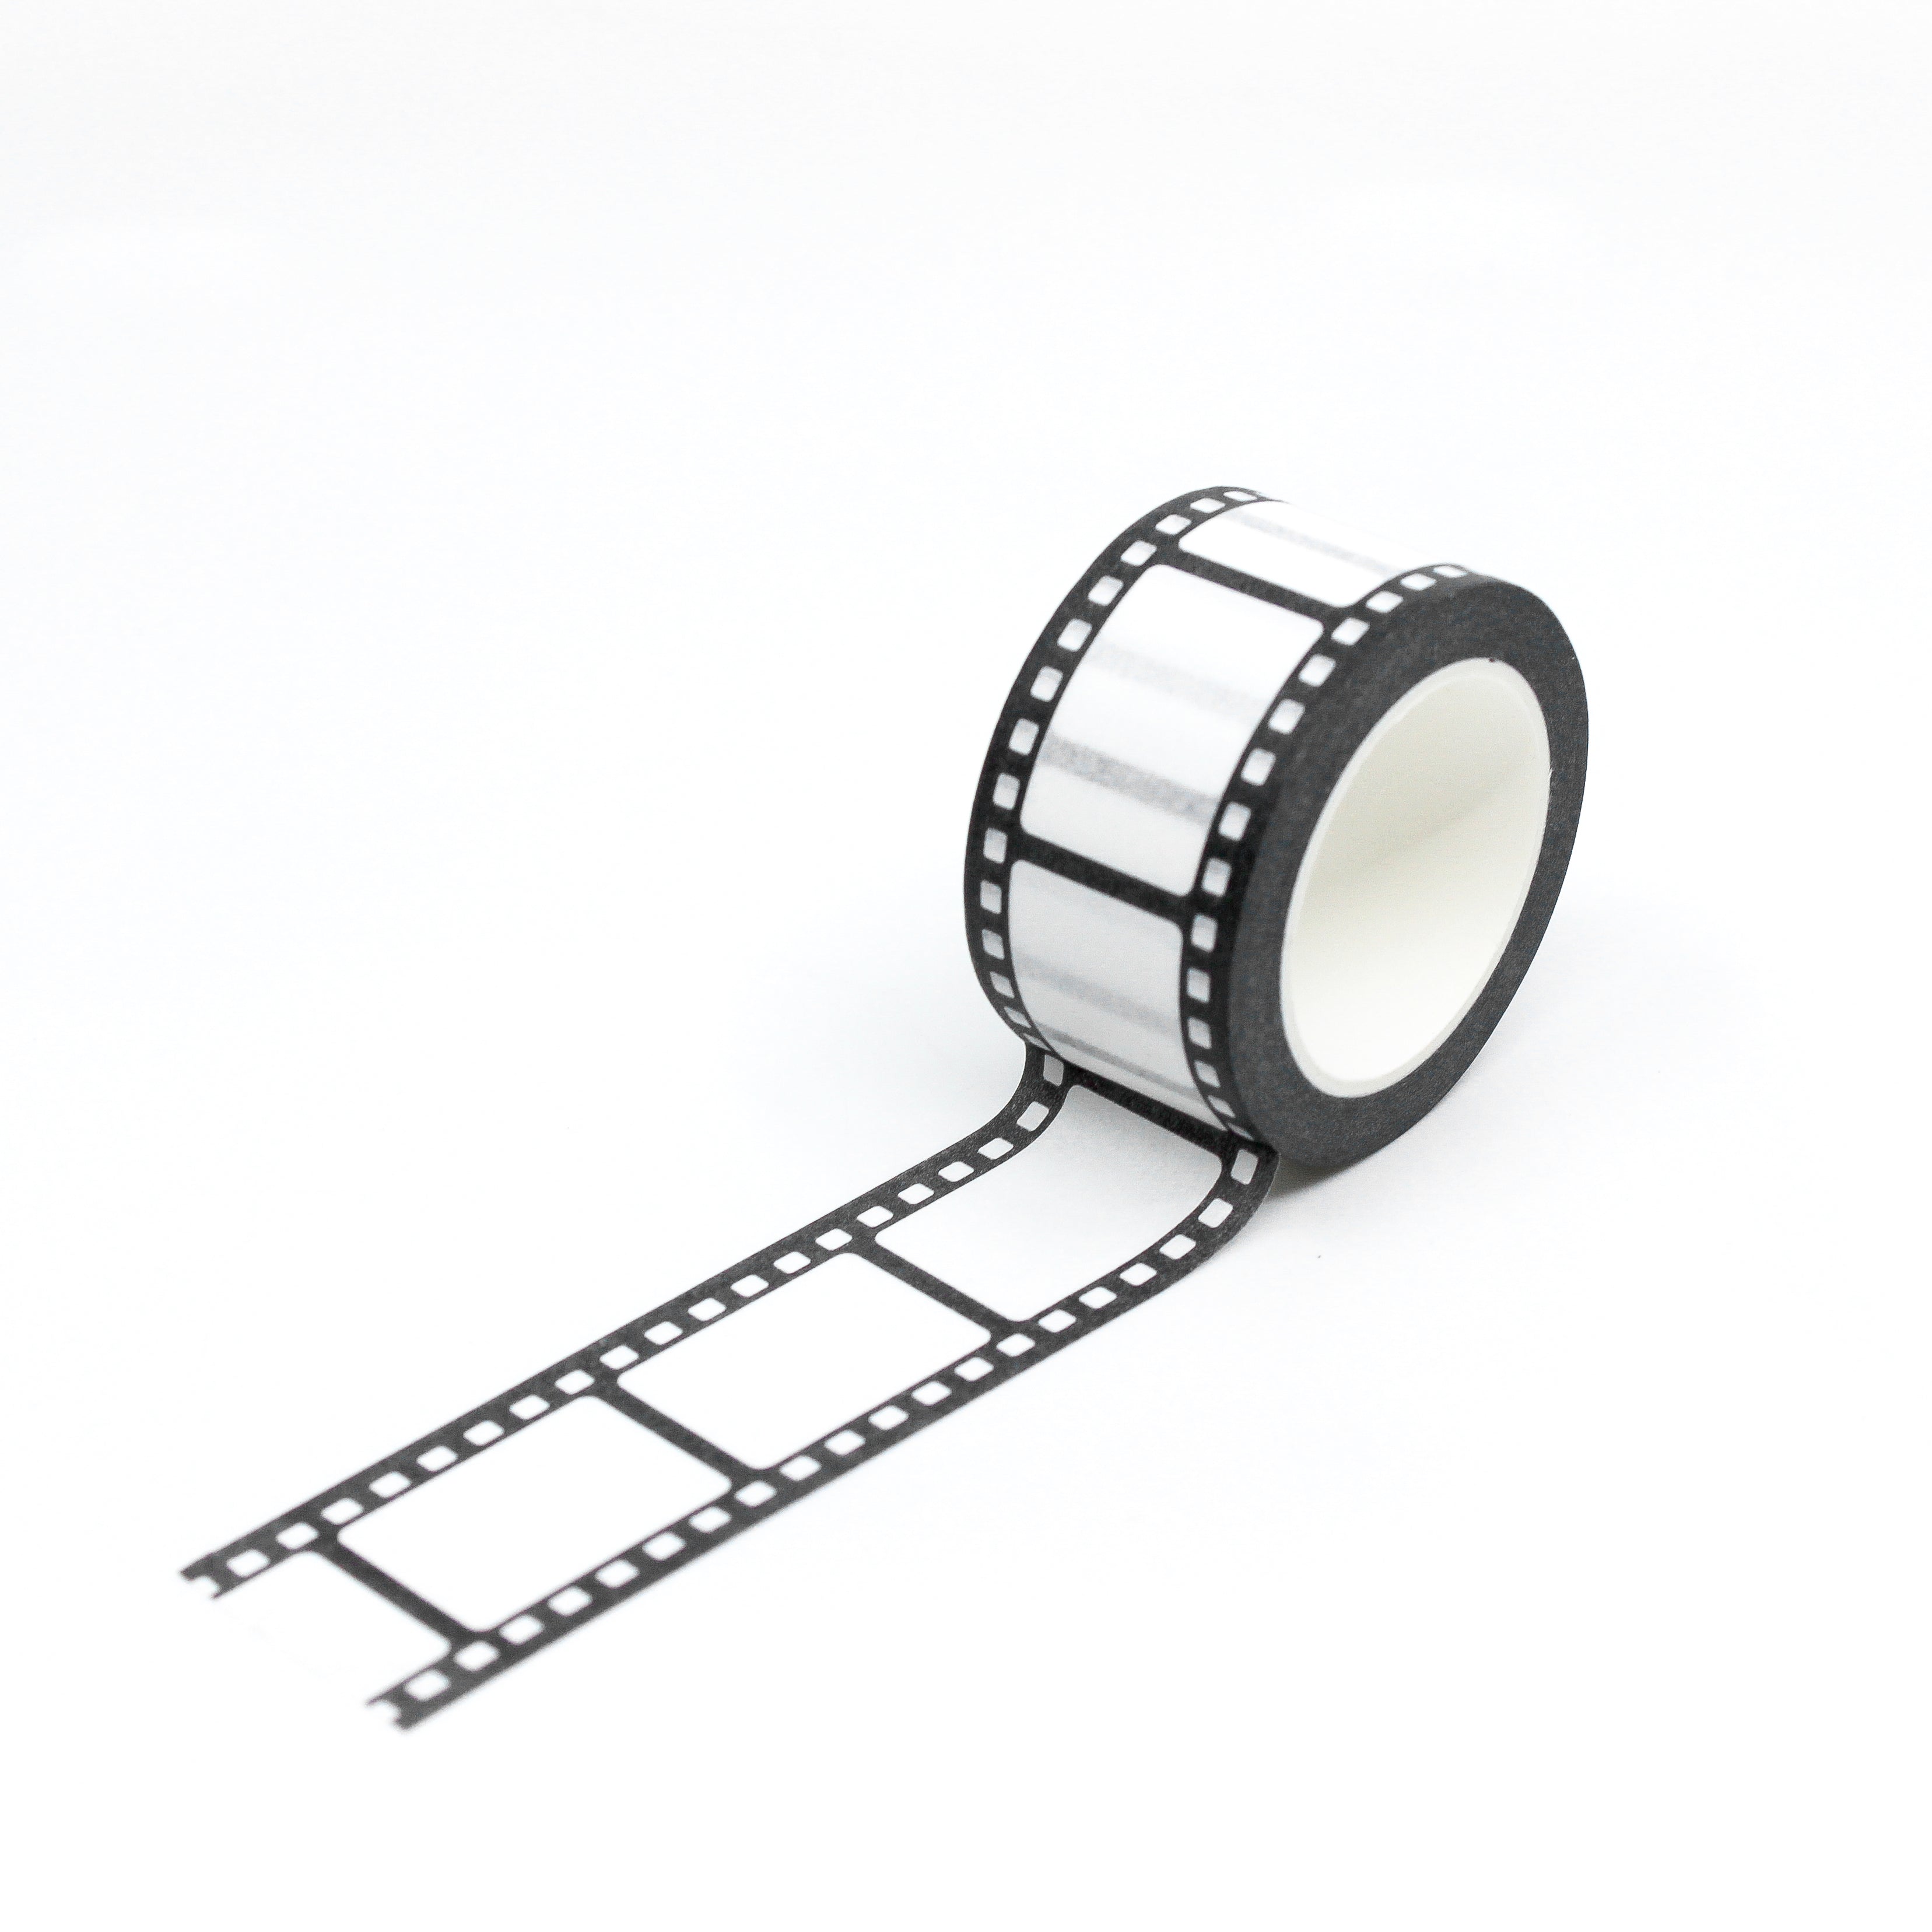 This wide film strip washi tape is perfect for your project. The black and white classic film strip look adds a bigger size to make your craft project easier. This size tape is exclusively sold at BBB Supplies Craft Shop.